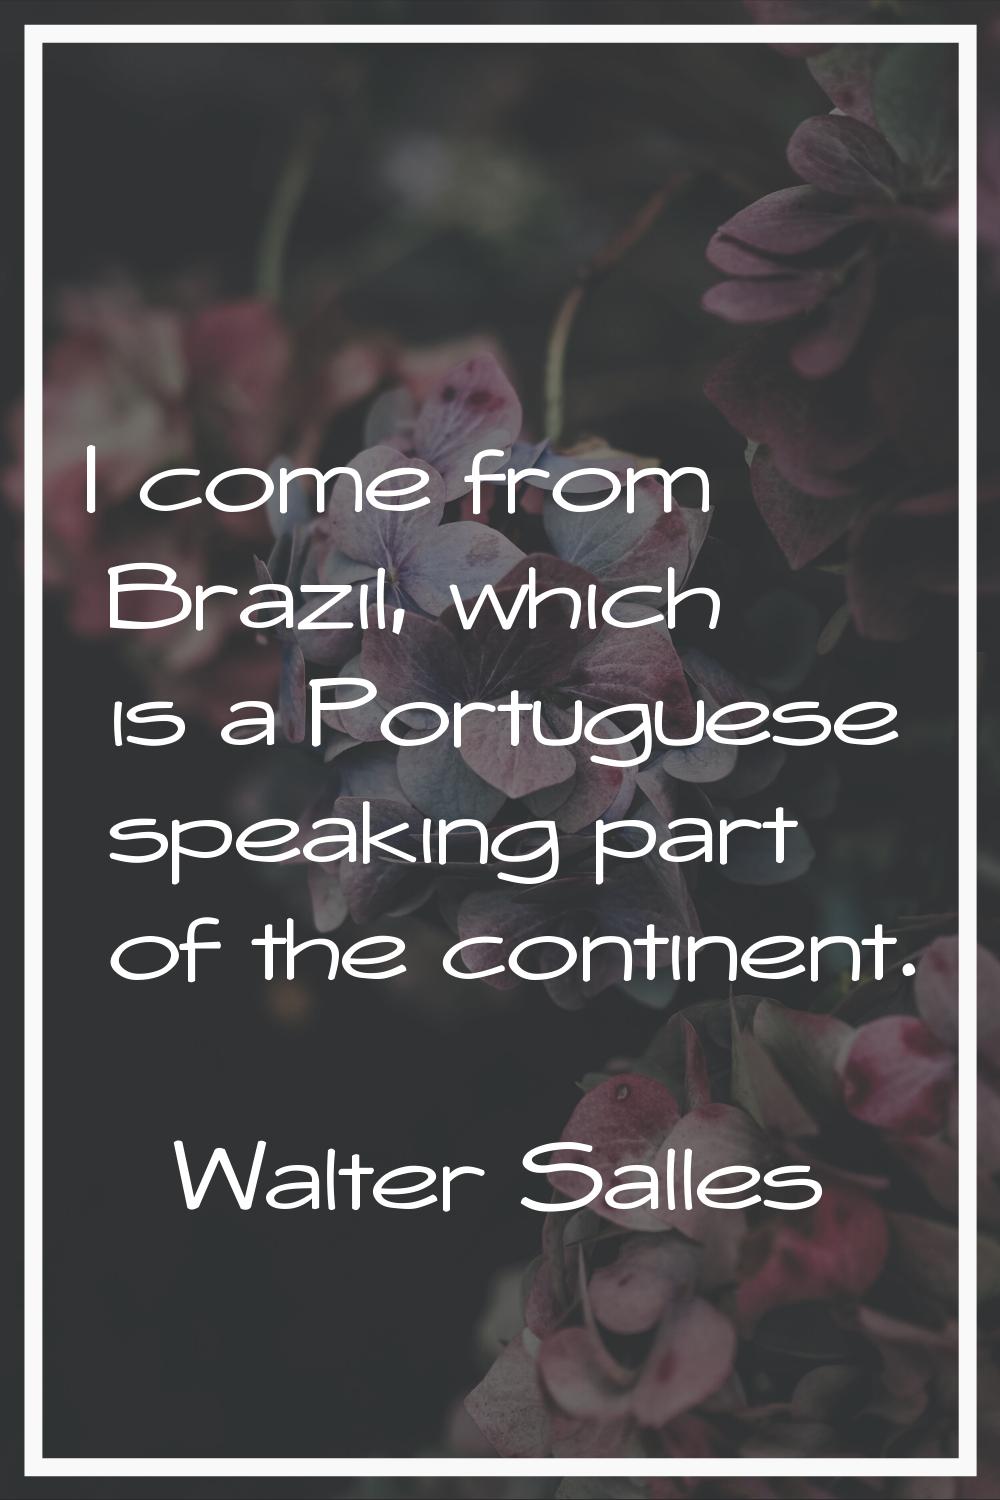 I come from Brazil, which is a Portuguese speaking part of the continent.